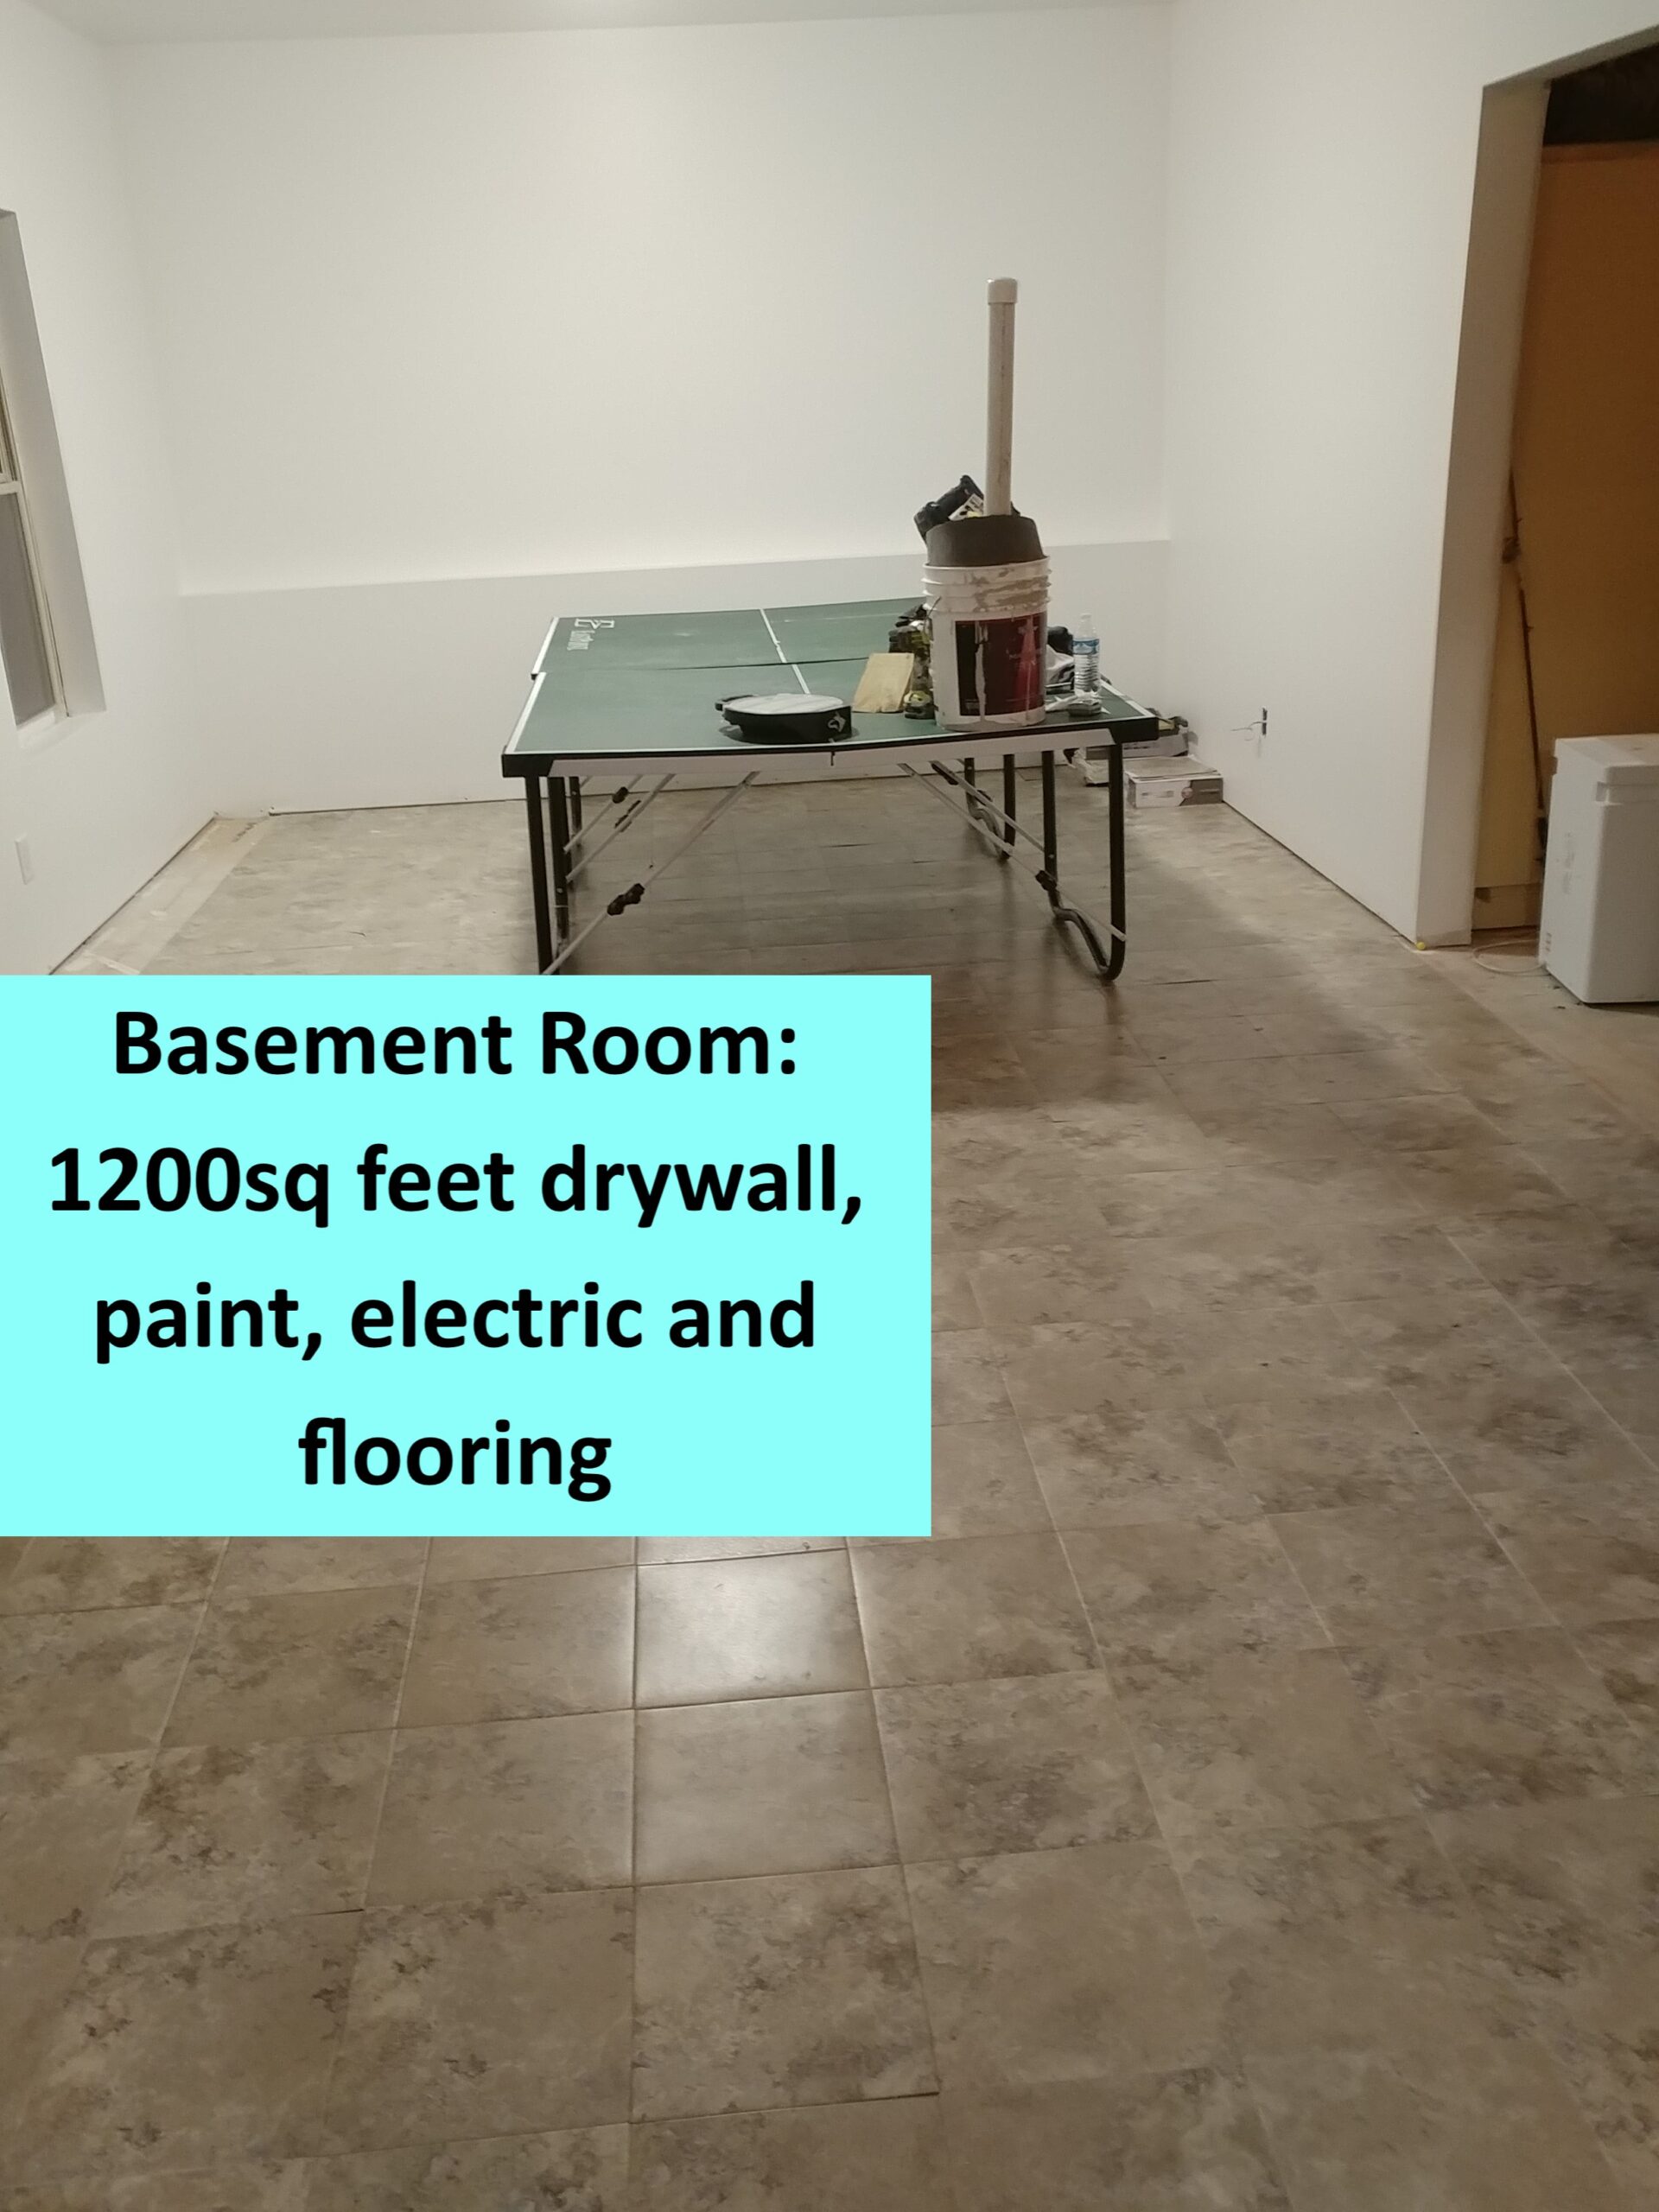 Finishing basements, turn an area from cement to fully livable area.